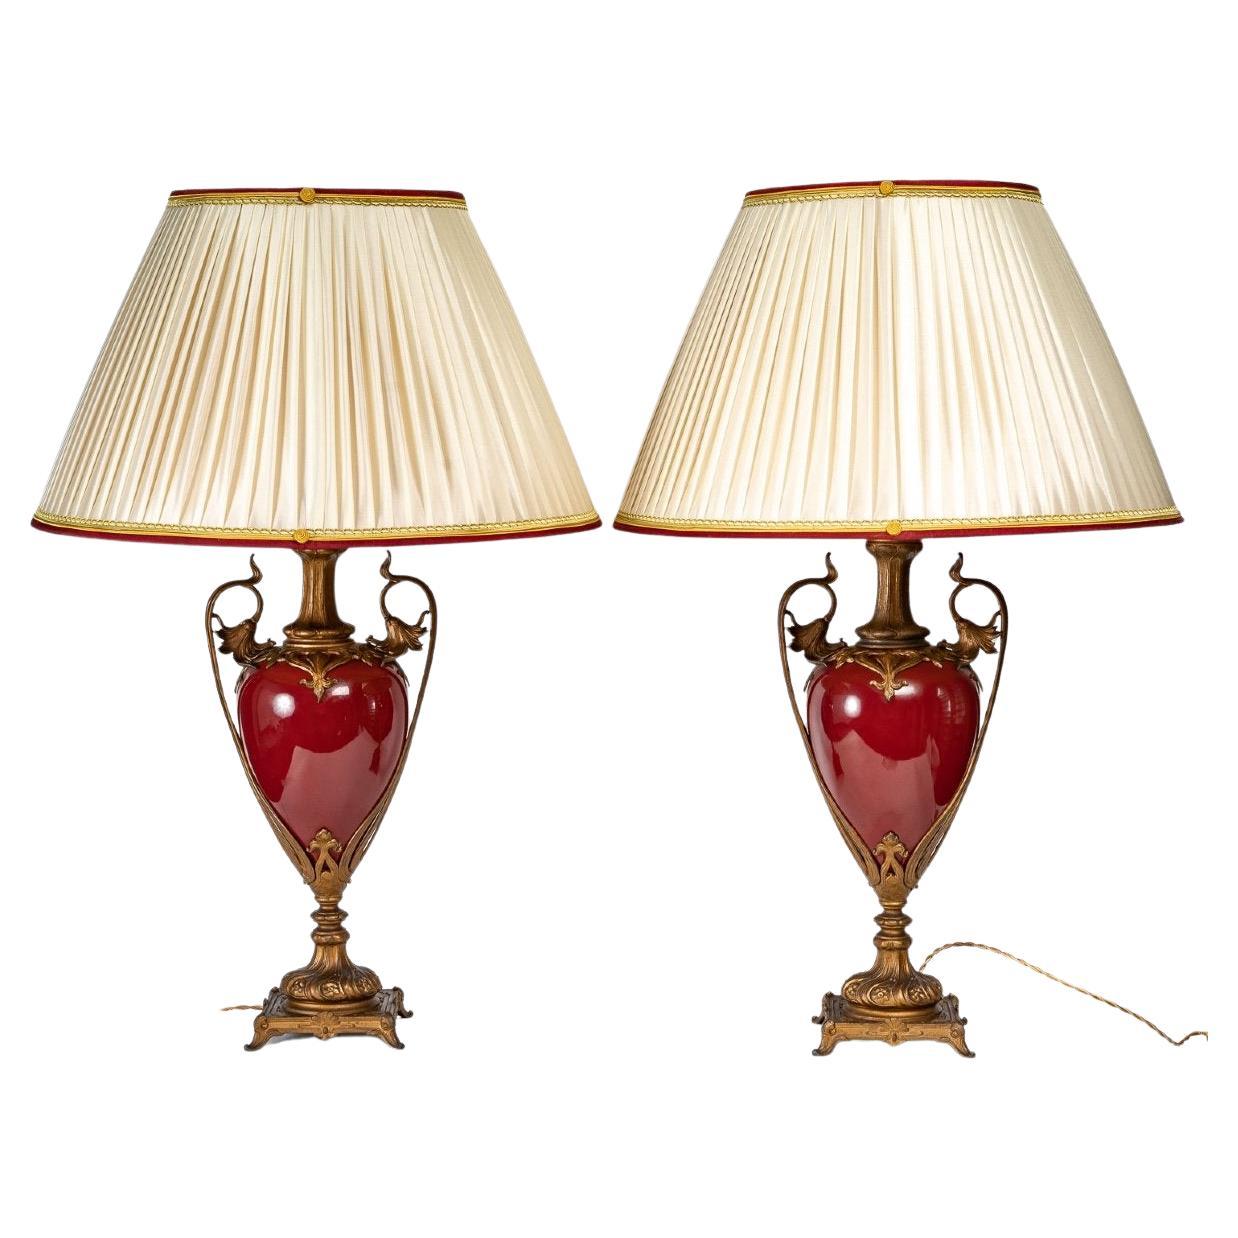 Pair of 19th Century Porcelain and Gilt Bronze Lamps